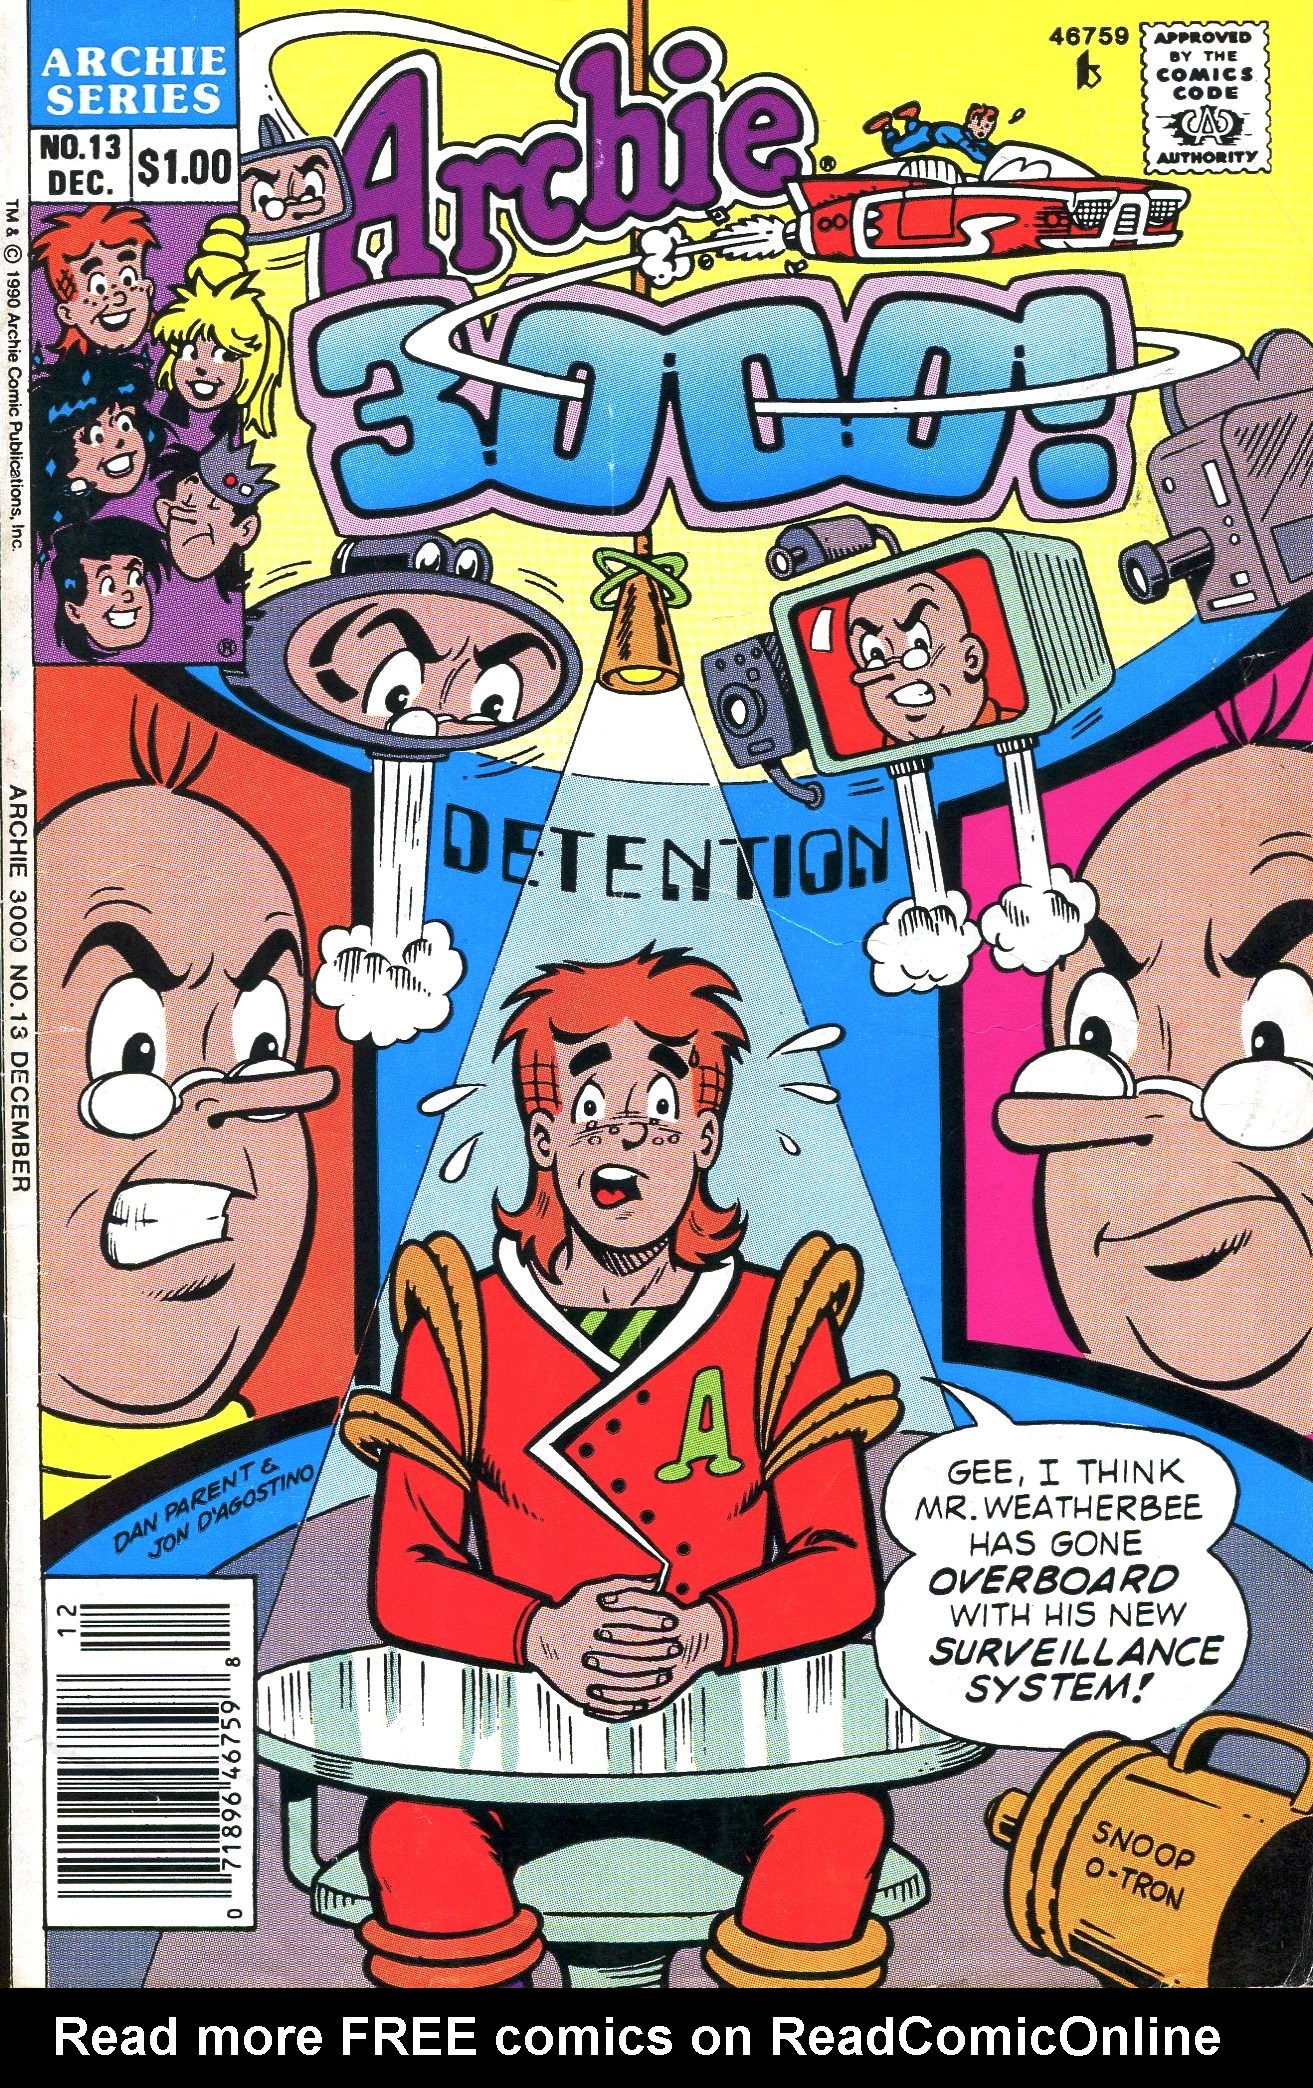 Archie 3000! (1989) issue 13 - Page 1